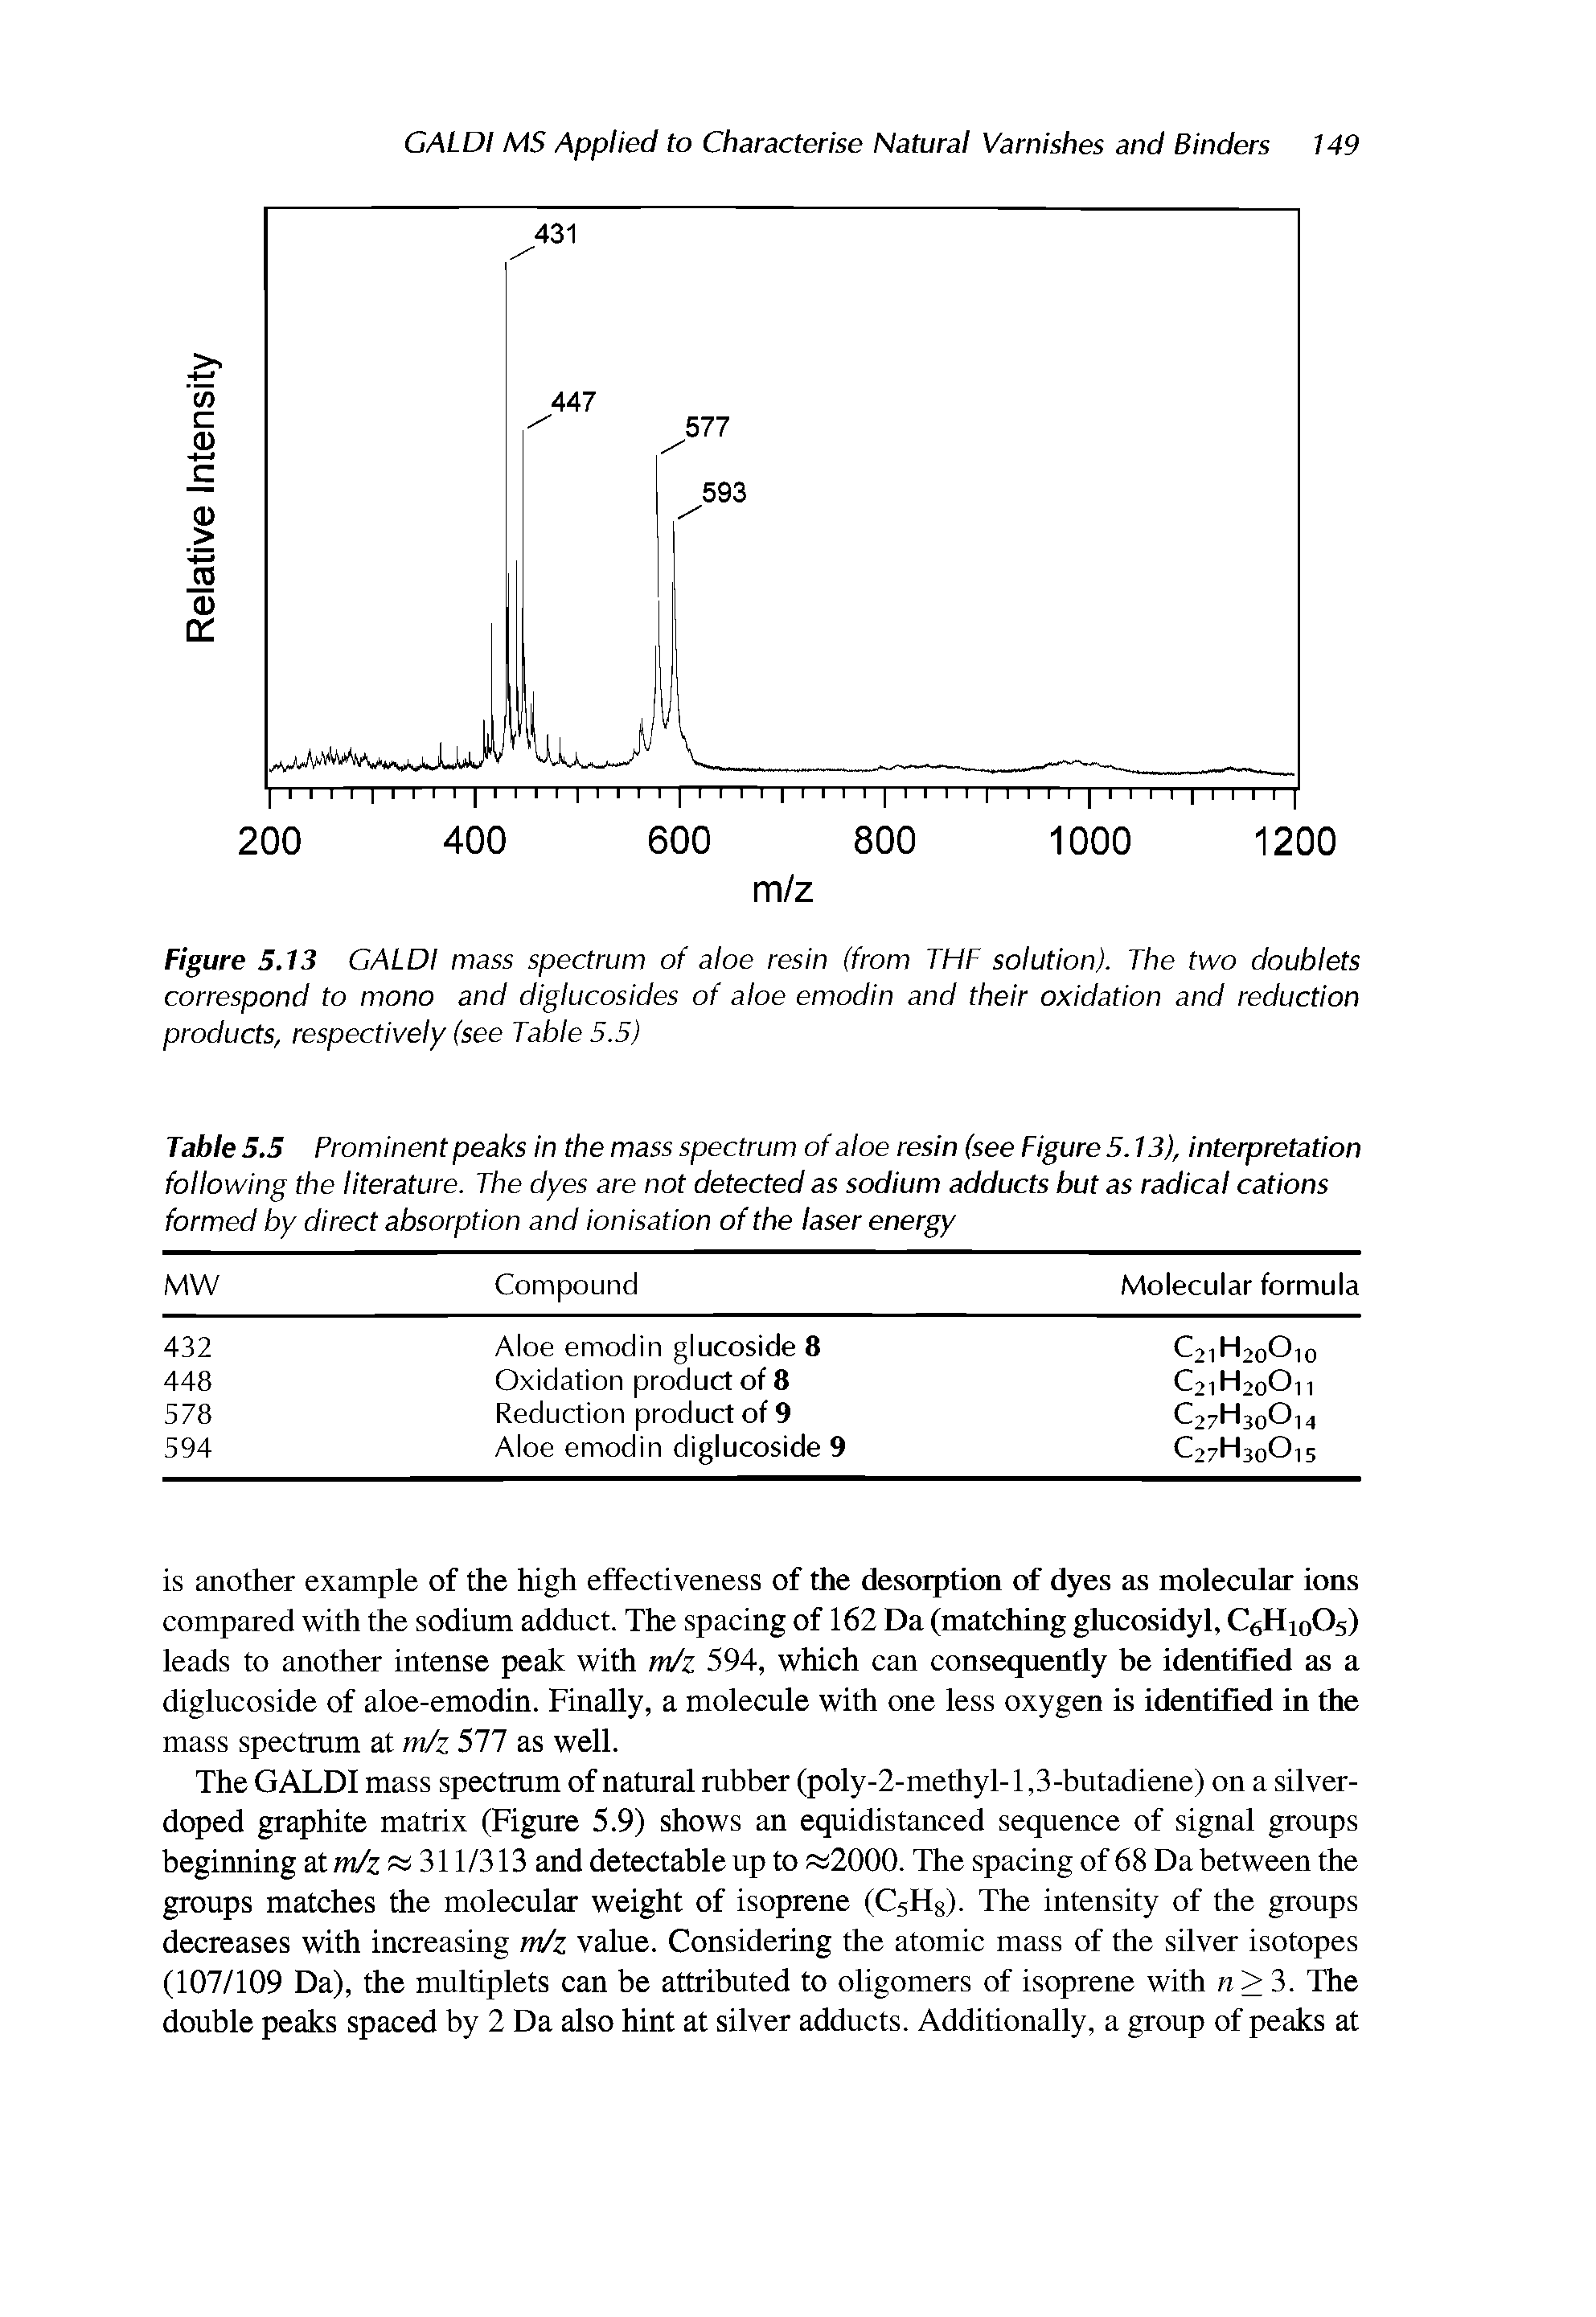 Table 5.5 Prominent peaks in the mass spectrum of aloe resin (see Figure 5.13), interpretation following the literature. The dyes are not detected as sodium adducts but as radical cations formed by direct absorption and ionisation of the laser energy...